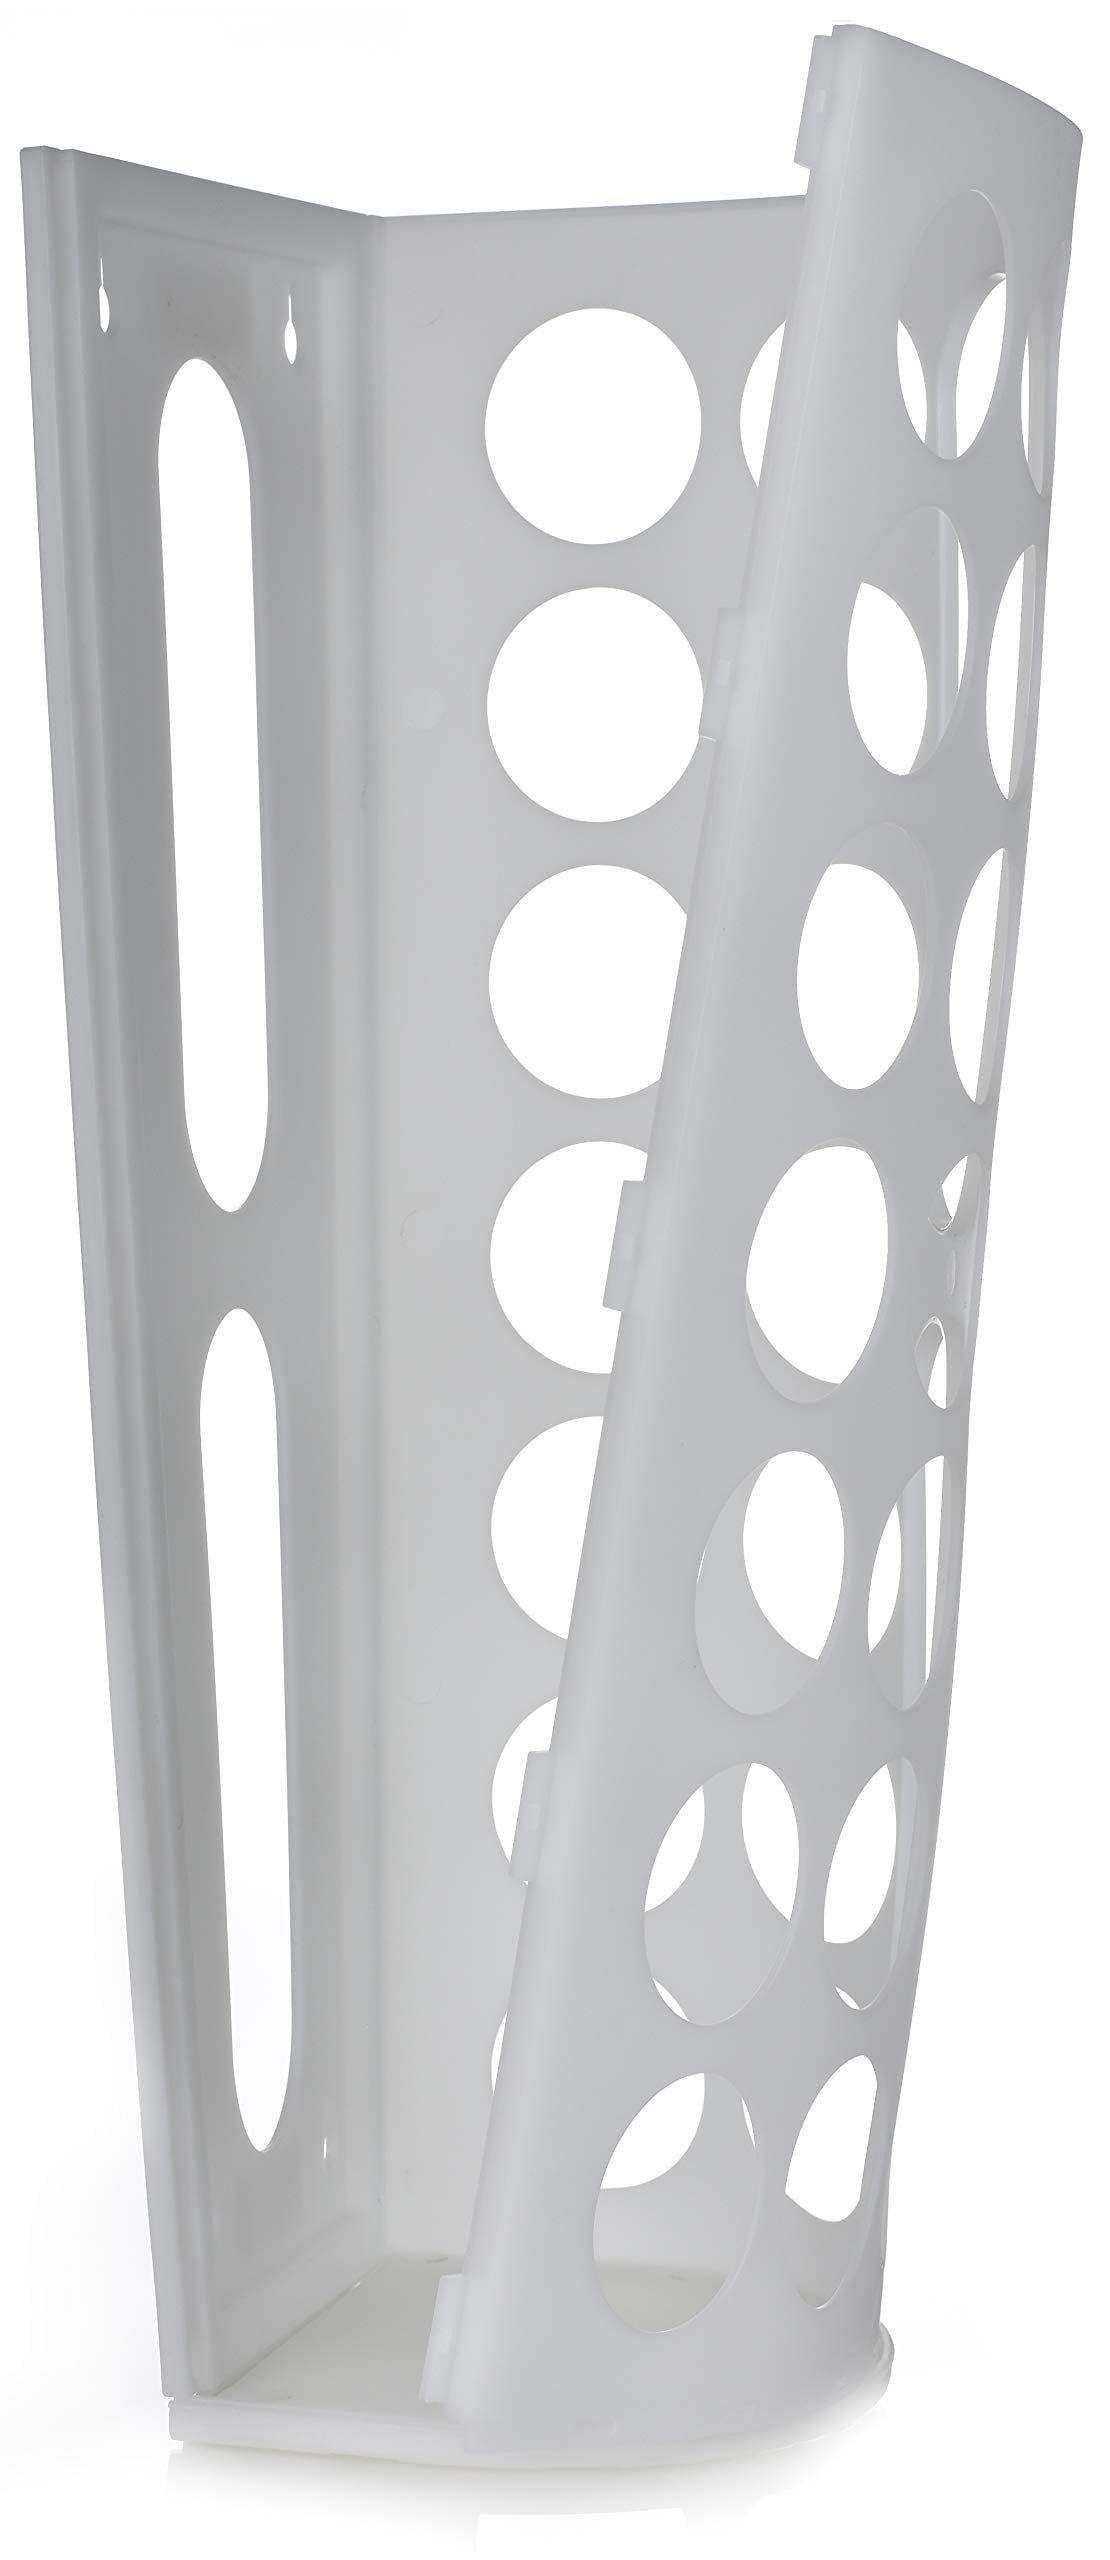 This Grocery Bag Dispenser Neatly Holds ALL of Your Grocery Bags!